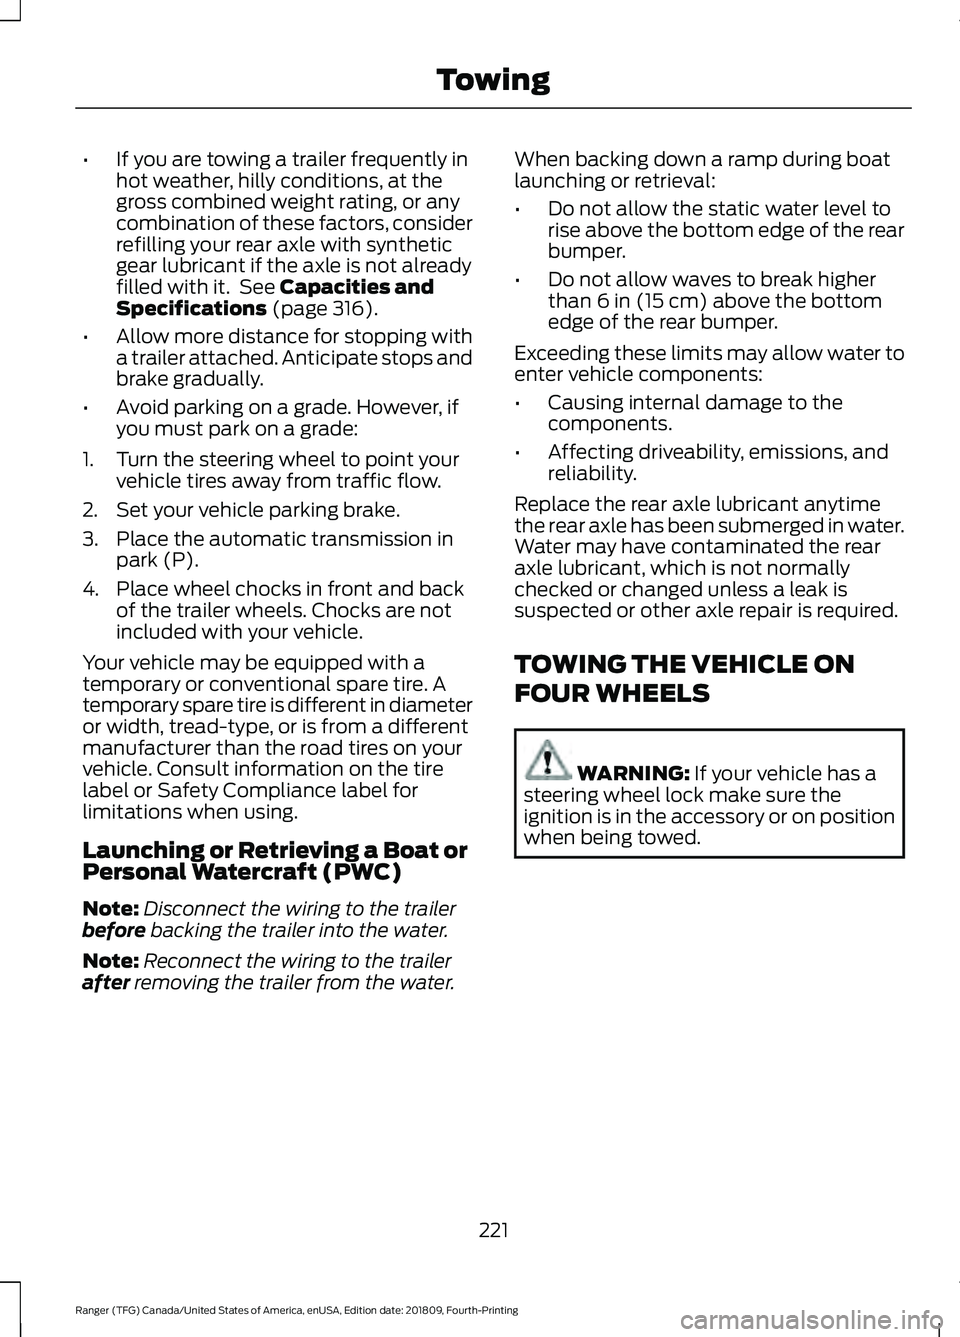 FORD RANGER 2019 User Guide •
If you are towing a trailer frequently in
hot weather, hilly conditions, at the
gross combined weight rating, or any
combination of these factors, consider
refilling your rear axle with synthetic
